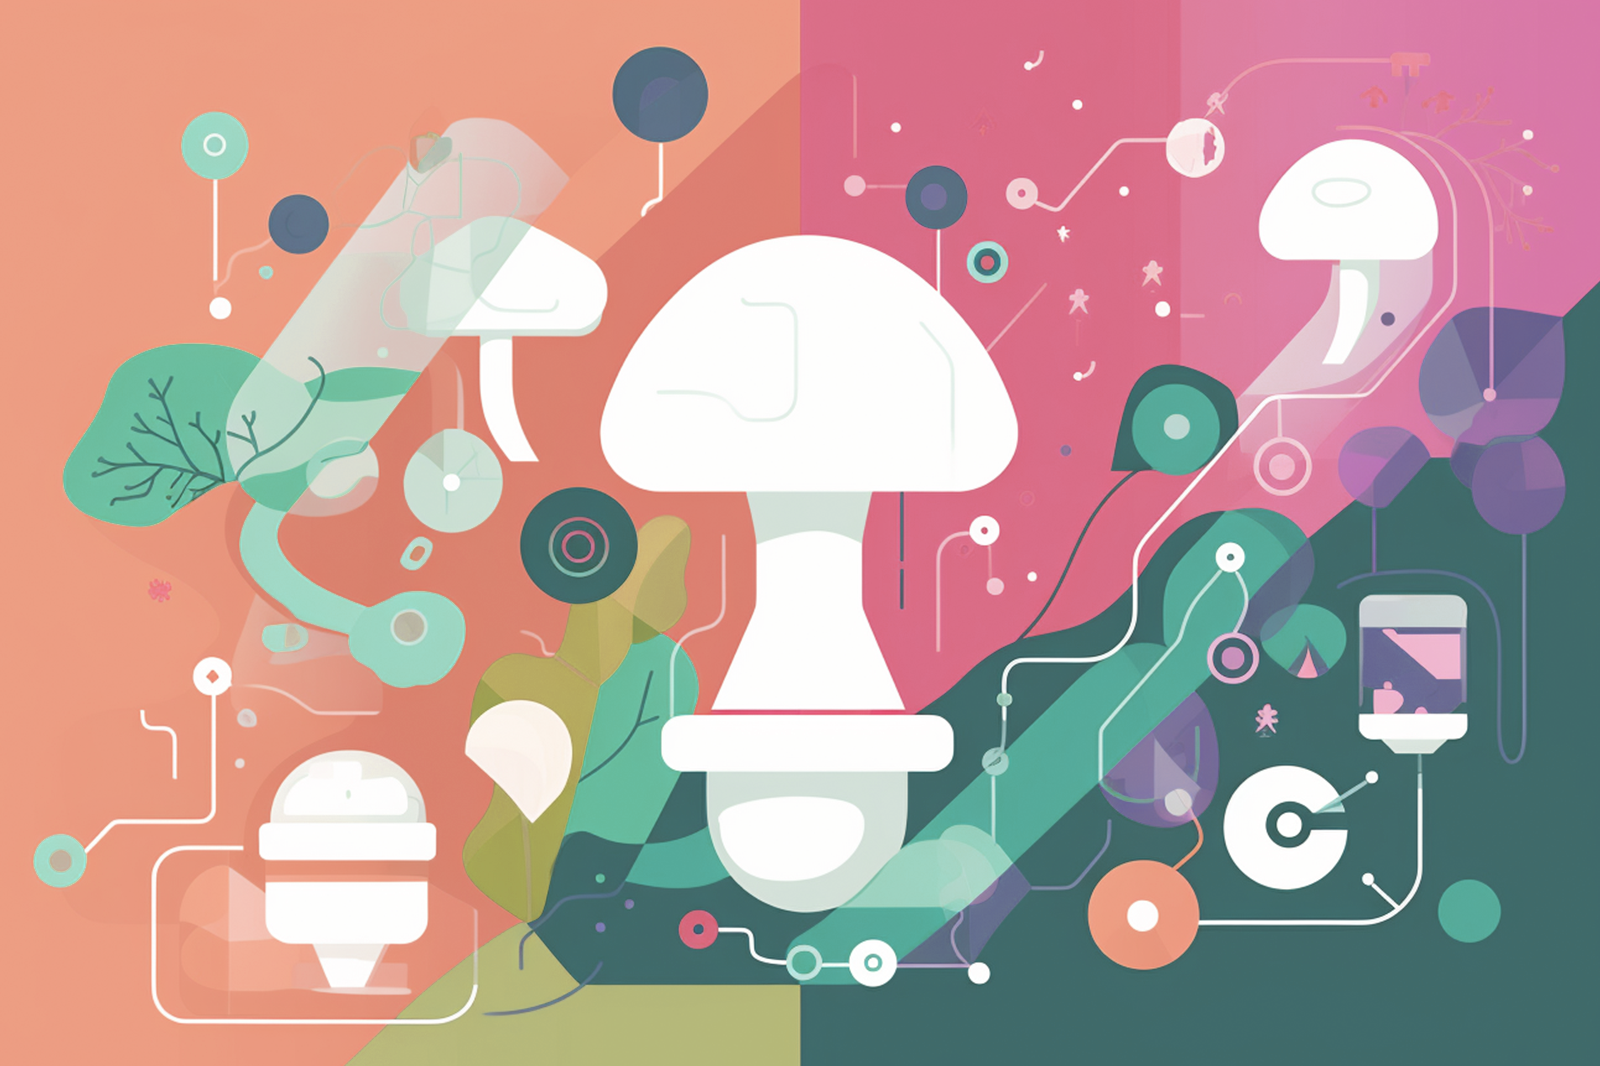 An illustration of a large mushroom surrounded by several small mushrooms against a vibrant, colorful background